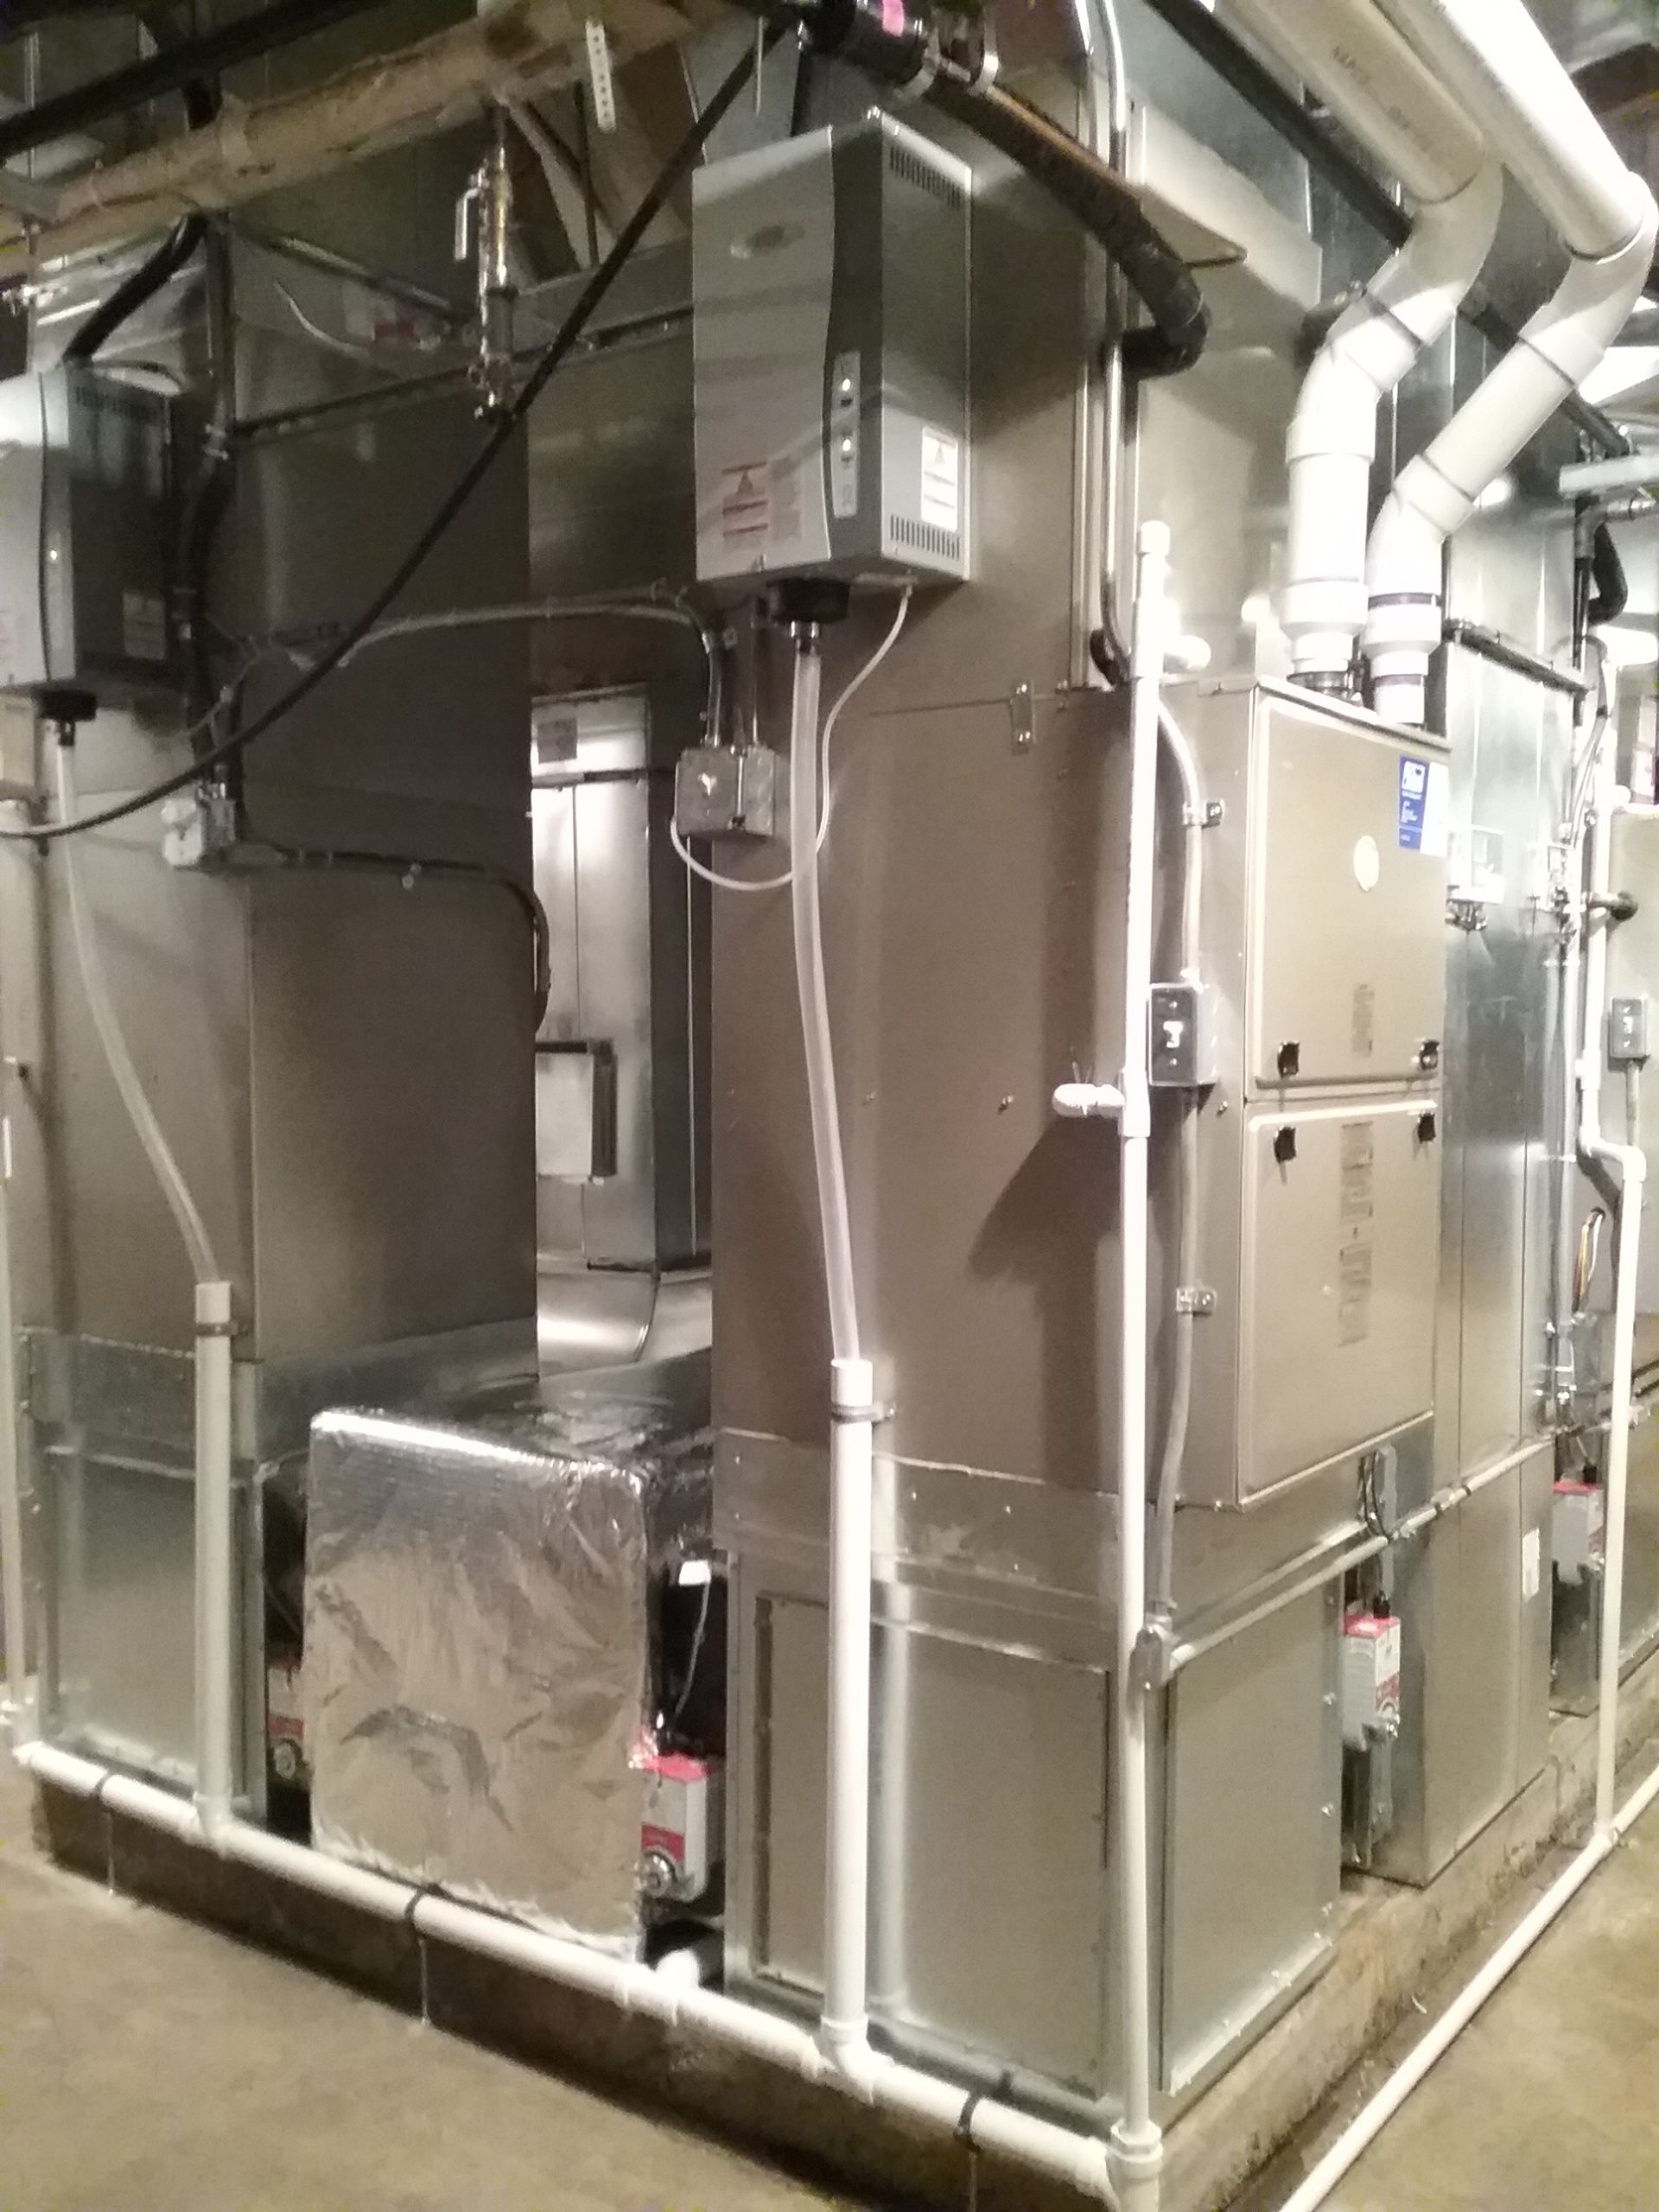 New high-efficiency gas furnaces in the furnace room of The Charles A. Weyerhaeuser Memorial Museum, Little Falls, MN, December 1, 2021.